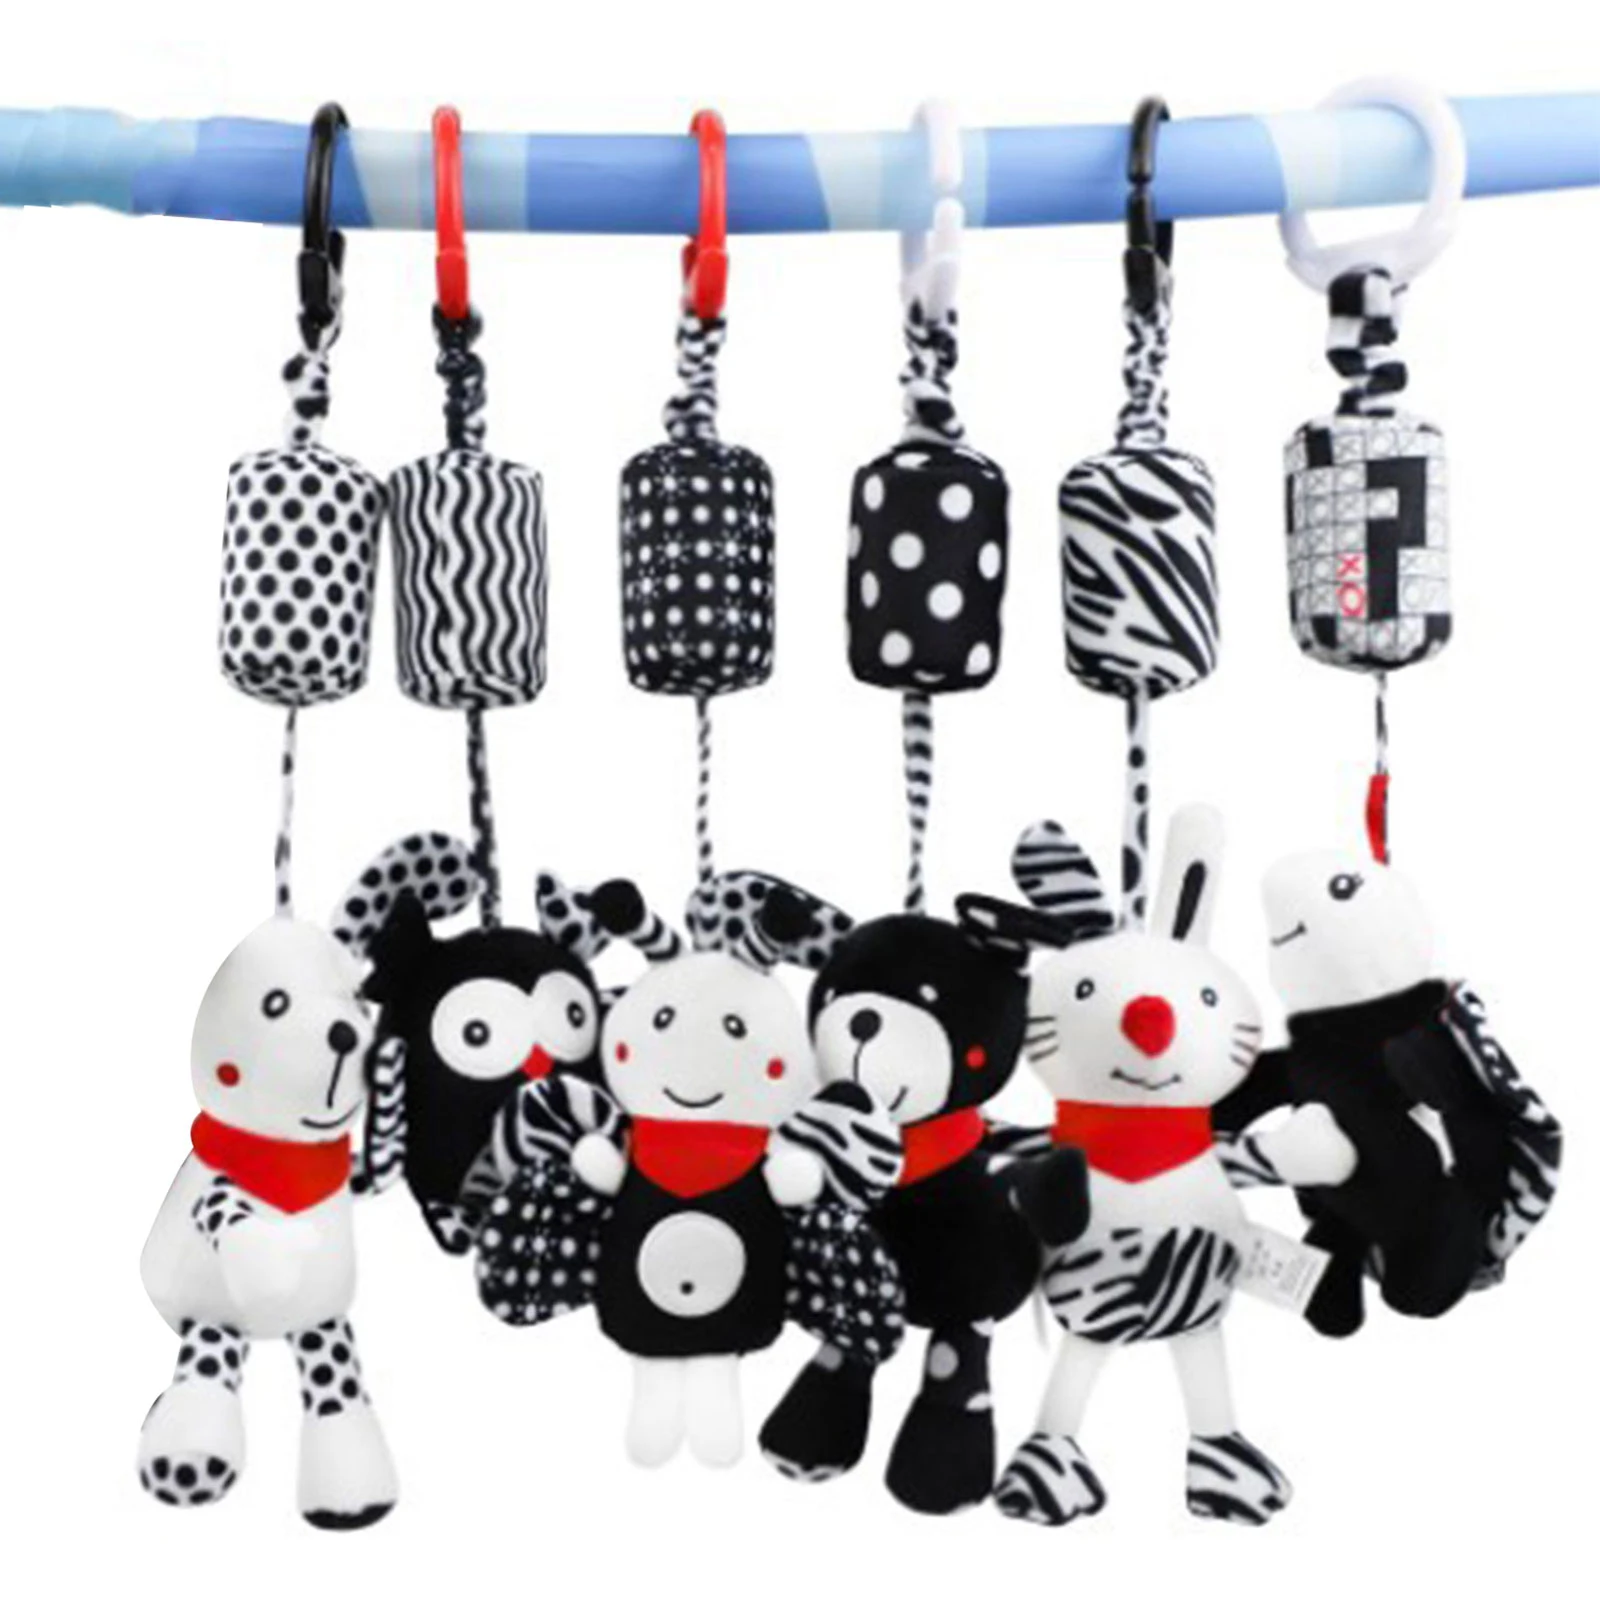 

Baby Stroller Rattle Toy Pushchair Wind Chime Pram Pendant Crib Hanging Bed Bell Cartoon Animal Plush Doll Infants Cot Education